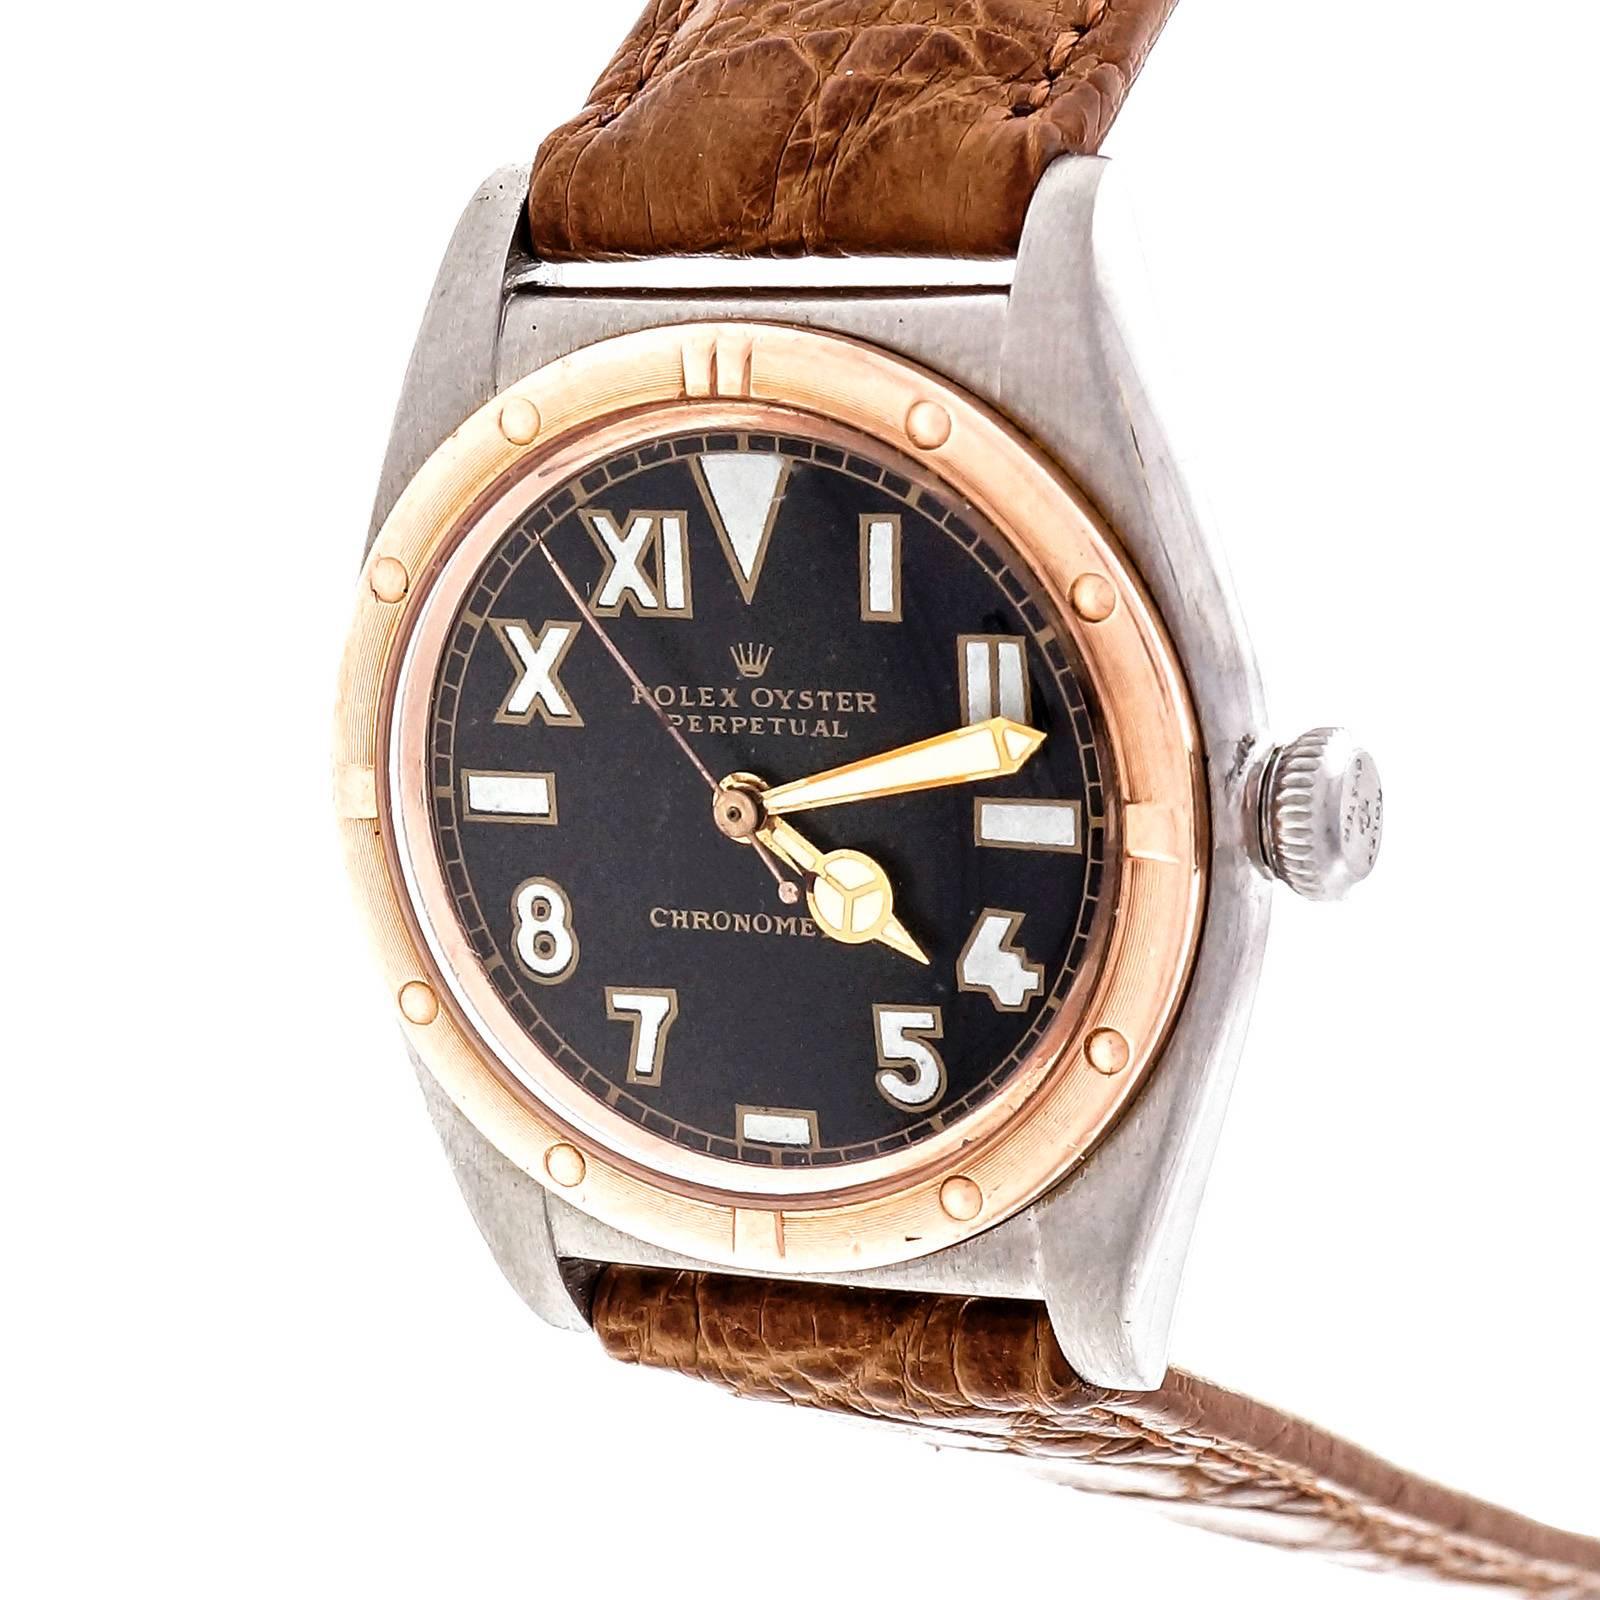 Rolex bubble back 1944 with deep pink, almost red, gold bezel and beautiful black dial with mixed Roman numerals and numbers. The dial is either original or an early authentic Rolex service dial on an early expert refinish job. 

Rose gold and